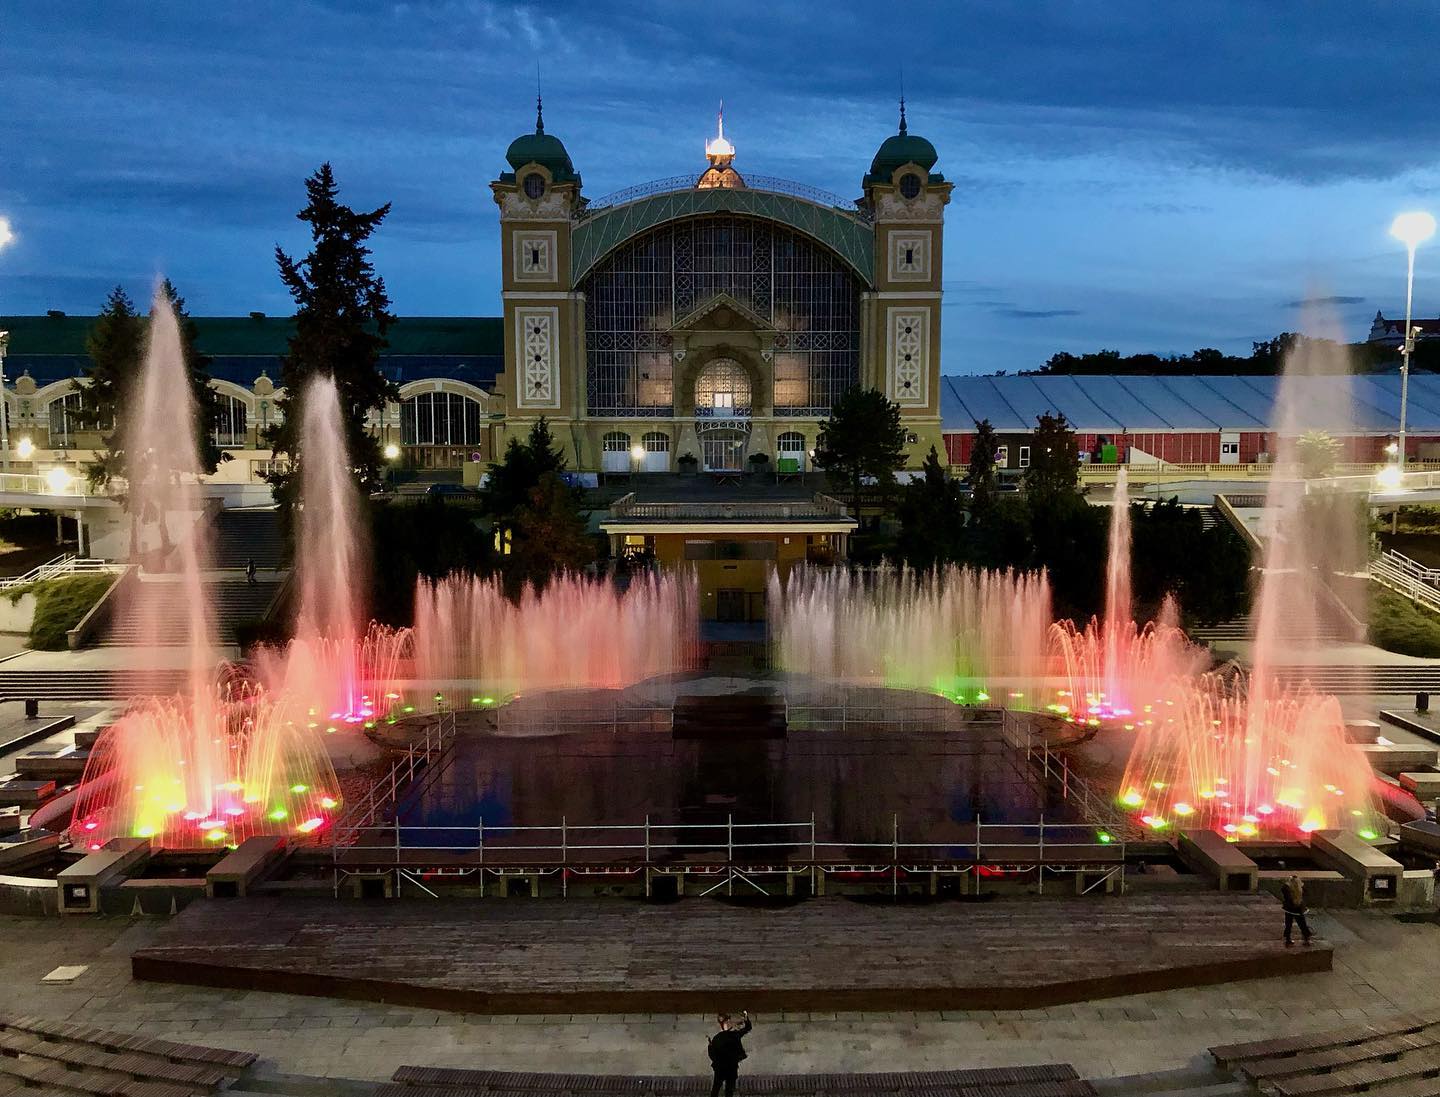 <p><span><span><span><span><span><span>The Křižíkova Fountain was designed by the Czech engineer František Křižík and was built for the 1891 Prague Industrial Exhibition. The fountain was not just a display of water and light; it featured intricate water jets, colorful lighting effects, and synchronized music performances. Its grandeur and beauty left spectators in awe, earning it the title of the "Czech Eiffel Tower."</span></span></span></span></span></span></p>  <p><span><span><span><span><span><span>In 1891, the fountain used 26 arc lamps as well as 50 water jets. The fountain was renovated almost 100 years later and opened to the public on May 15th, 1991. Today, the Křižíkova Fountain is used for short-term events, such as concerts, shows, and plays. The fountain uses 1,300 lights, almost 3,000 water jets, and 49 water pumps.</span></span></span></span></span></span></p>